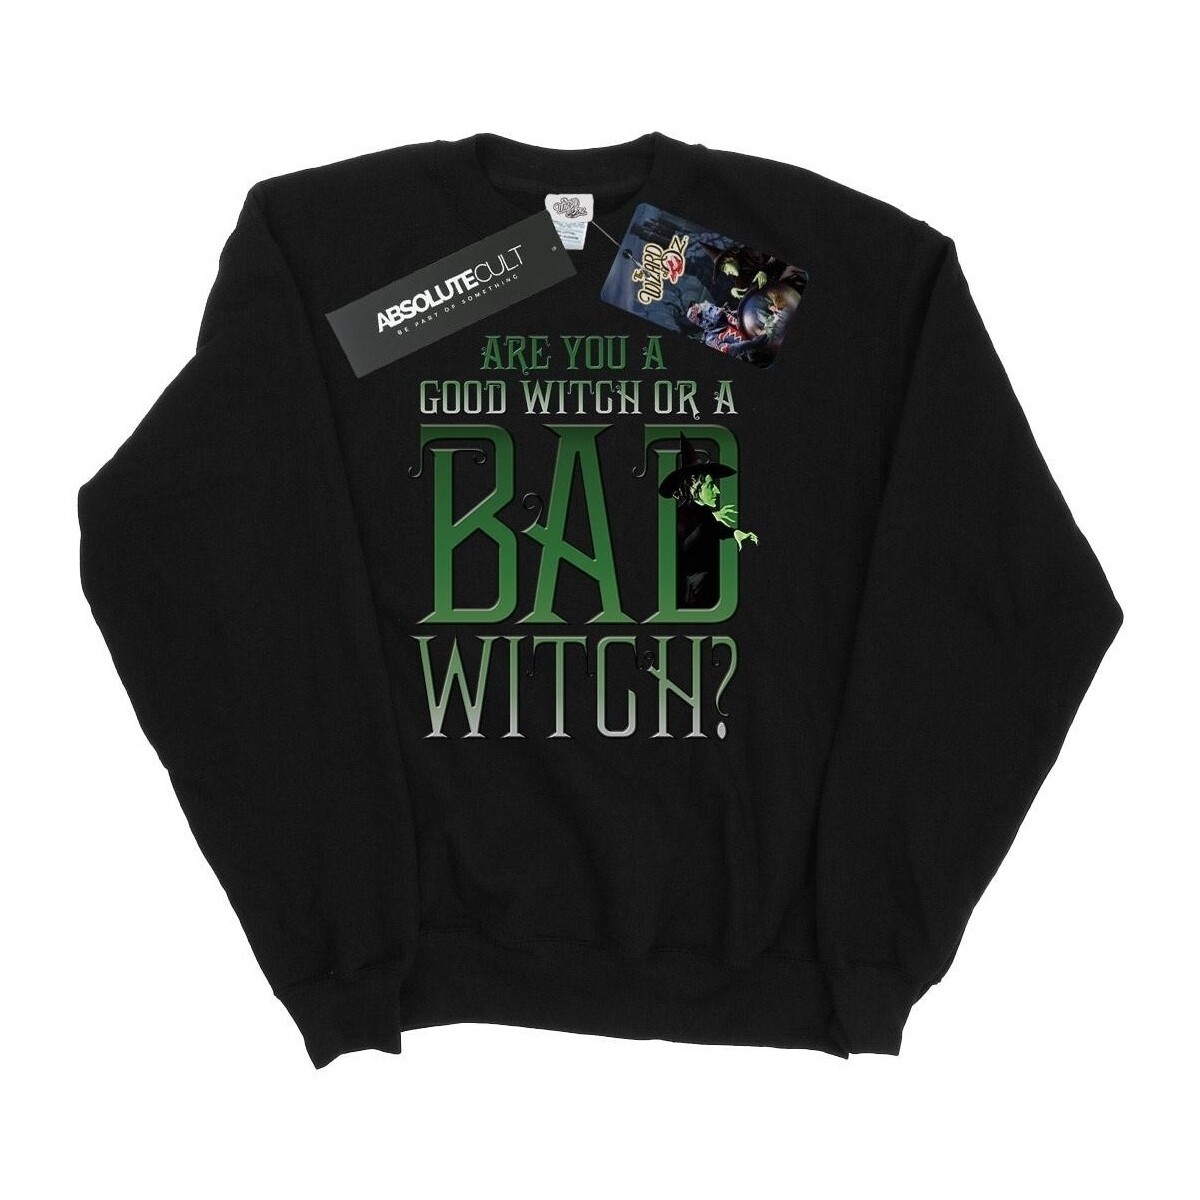 Vêtements Homme Sweats The Wizard Of Oz Good Witch Bad Witch Noir